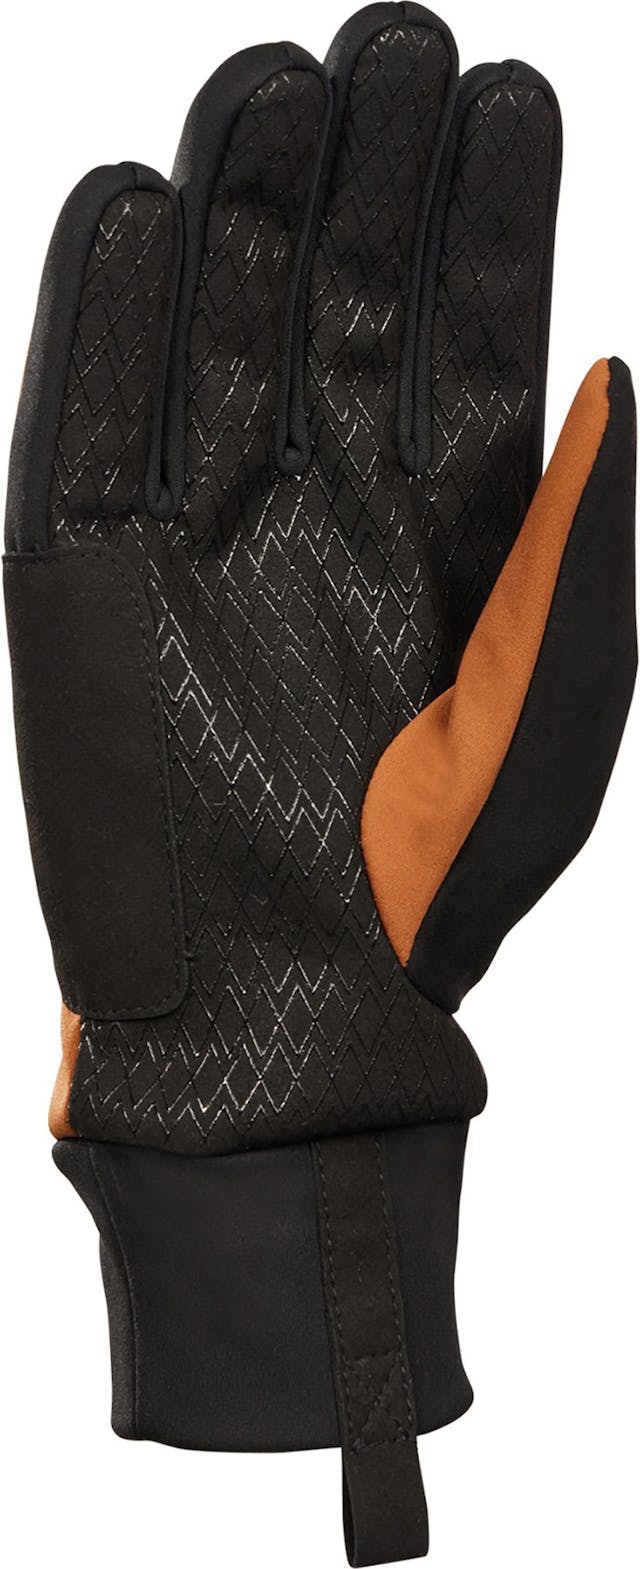 Product image for Intense Cross-Country Gloves - Women's